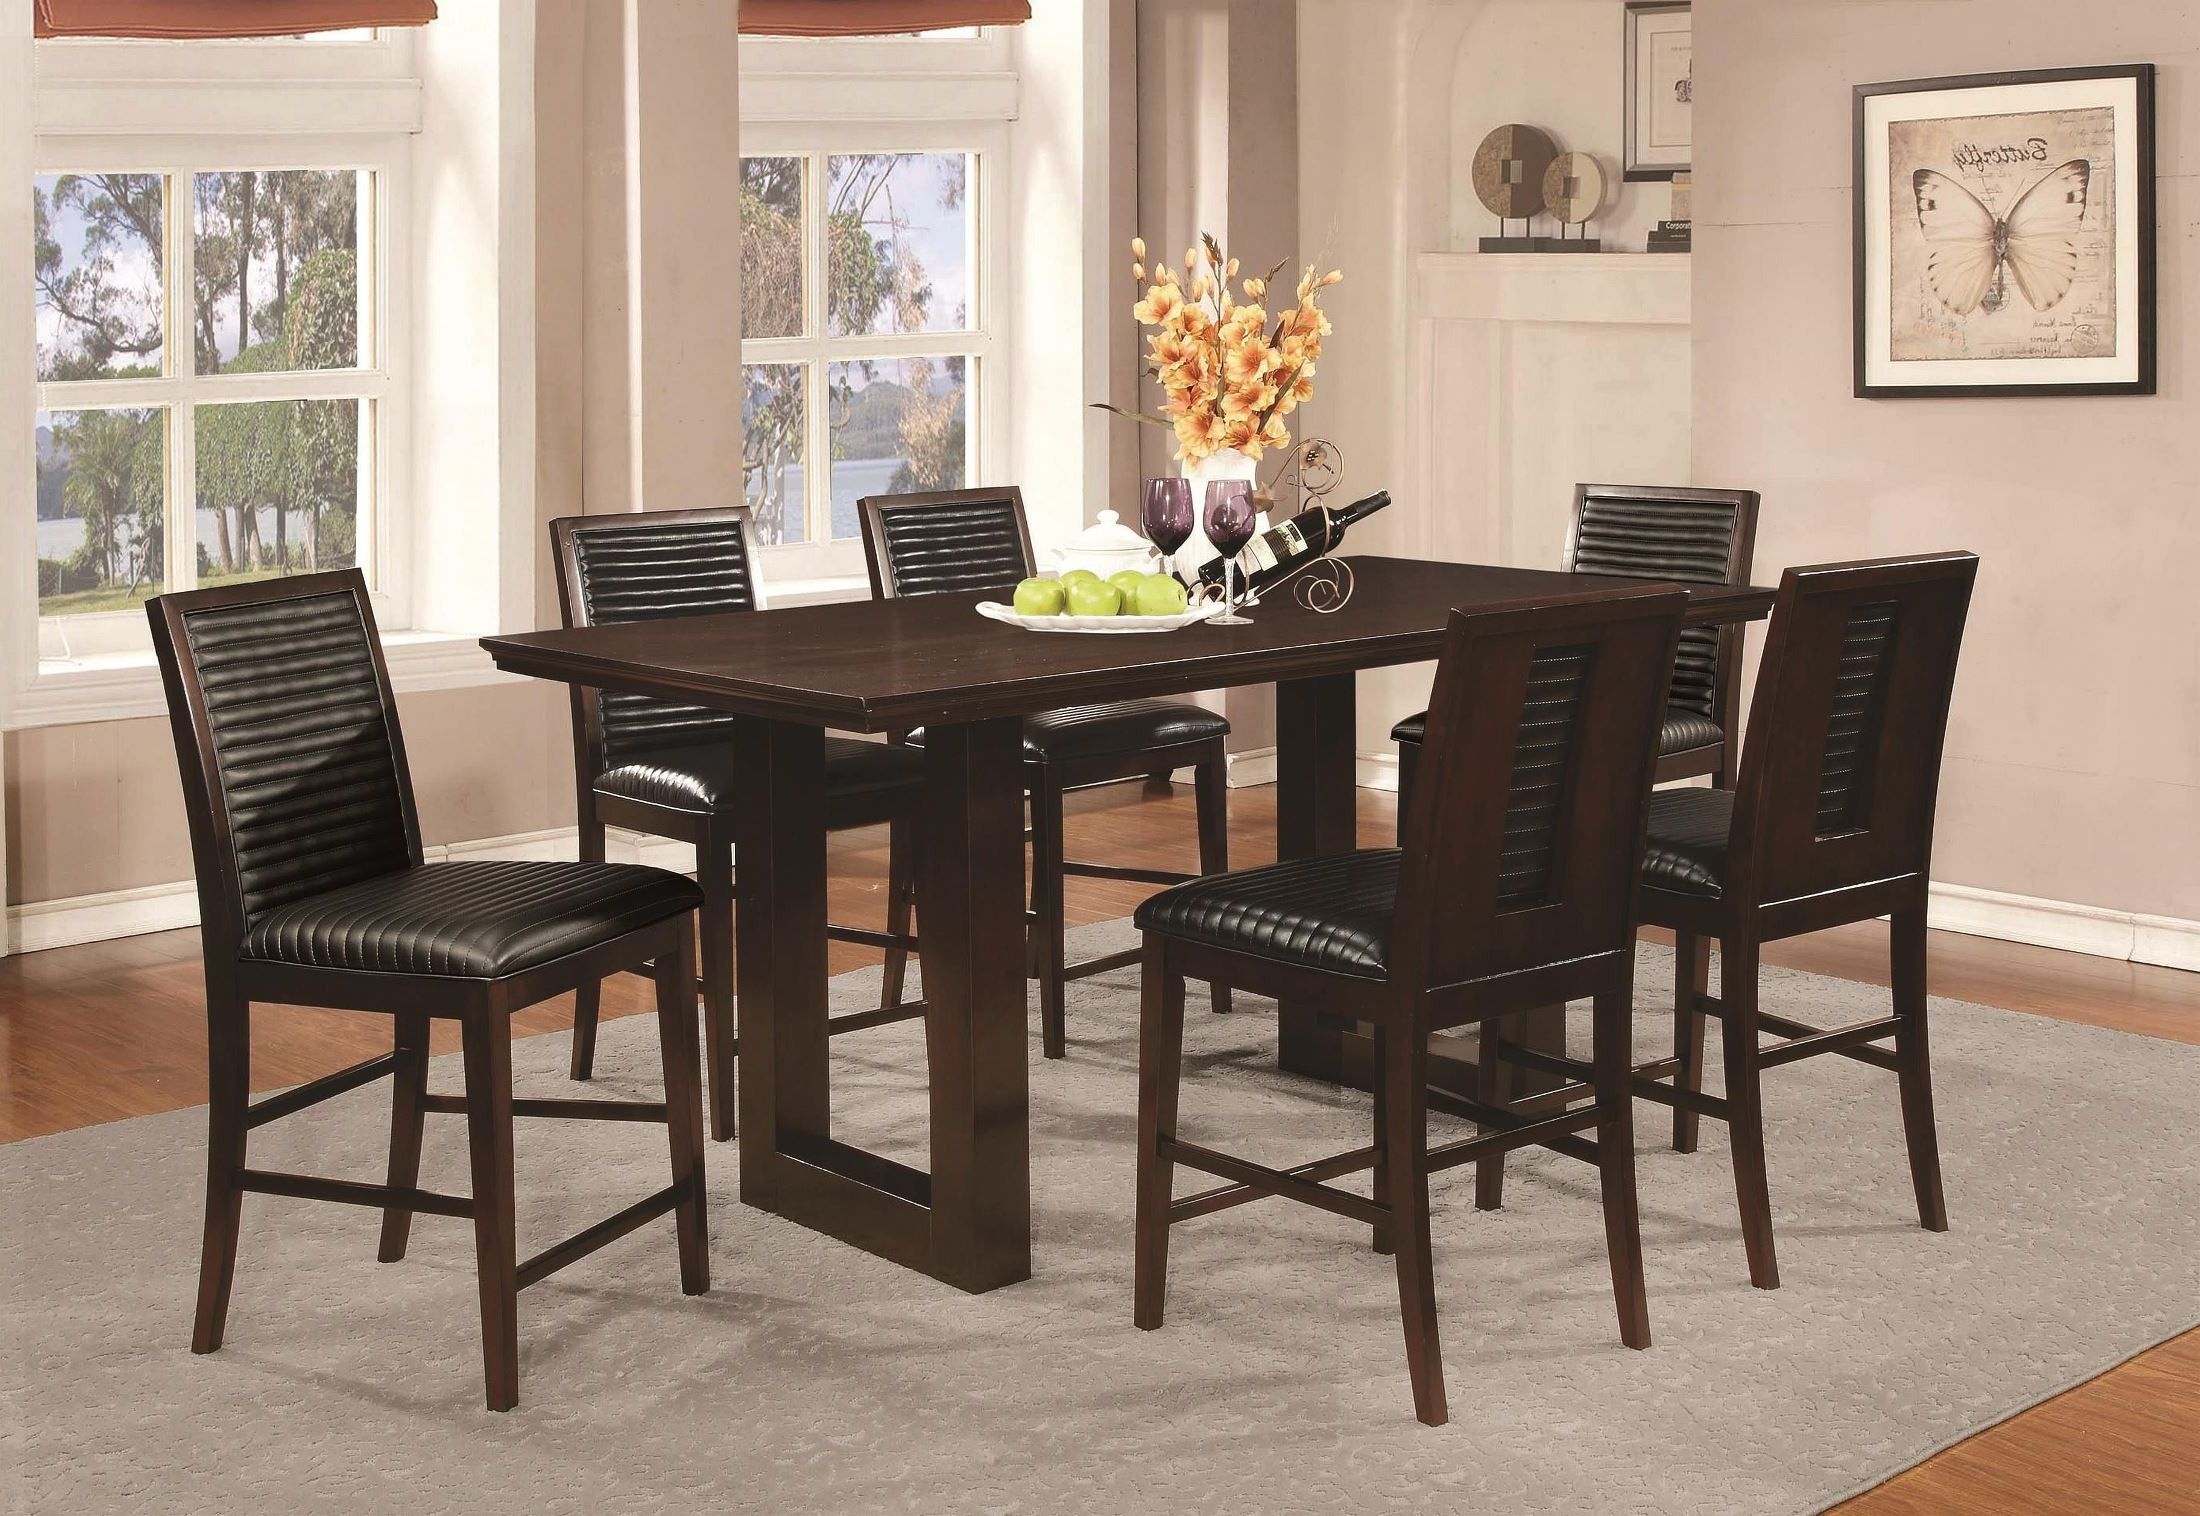 Preferred Counter Height Pedestal Dining Tables Intended For Chester Rectangular Pedestal Counter Height Dining Set (Gallery 15 of 20)